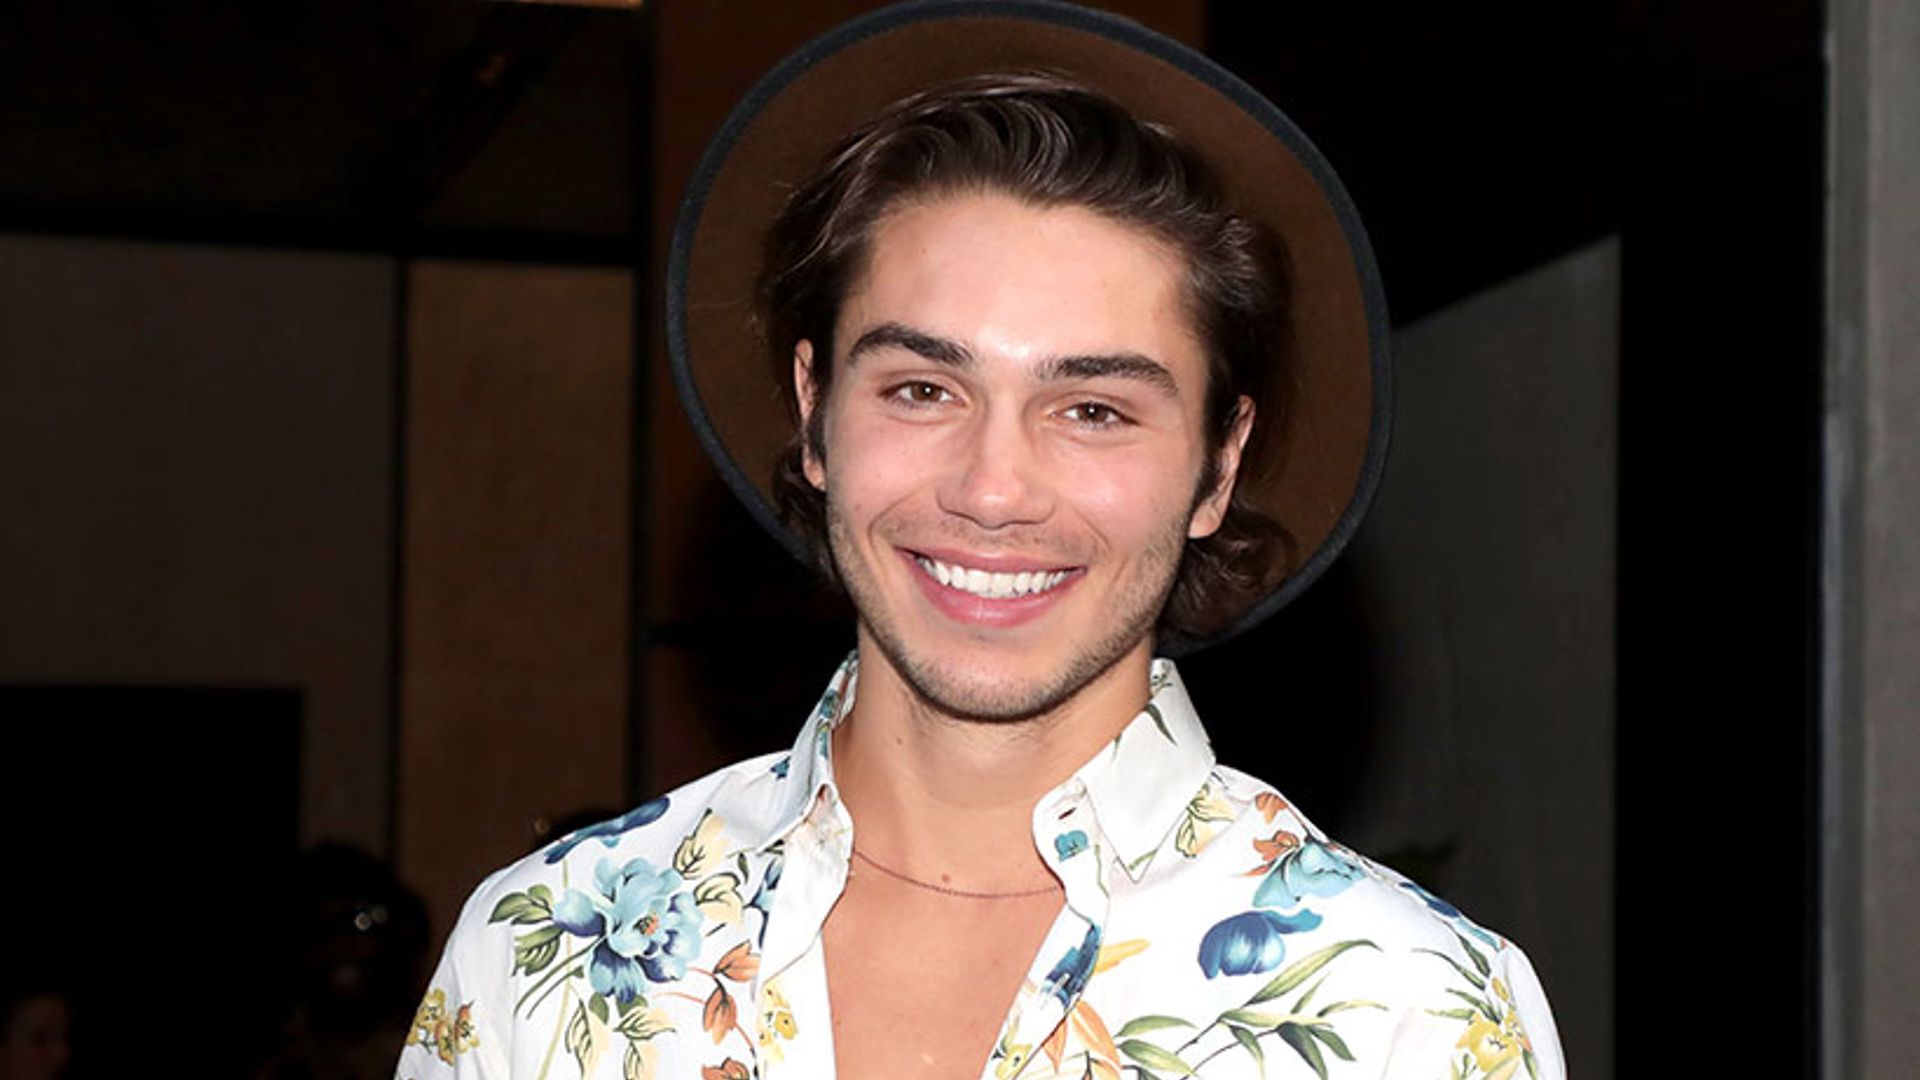 George Shelley makes first public appearance since death of sister